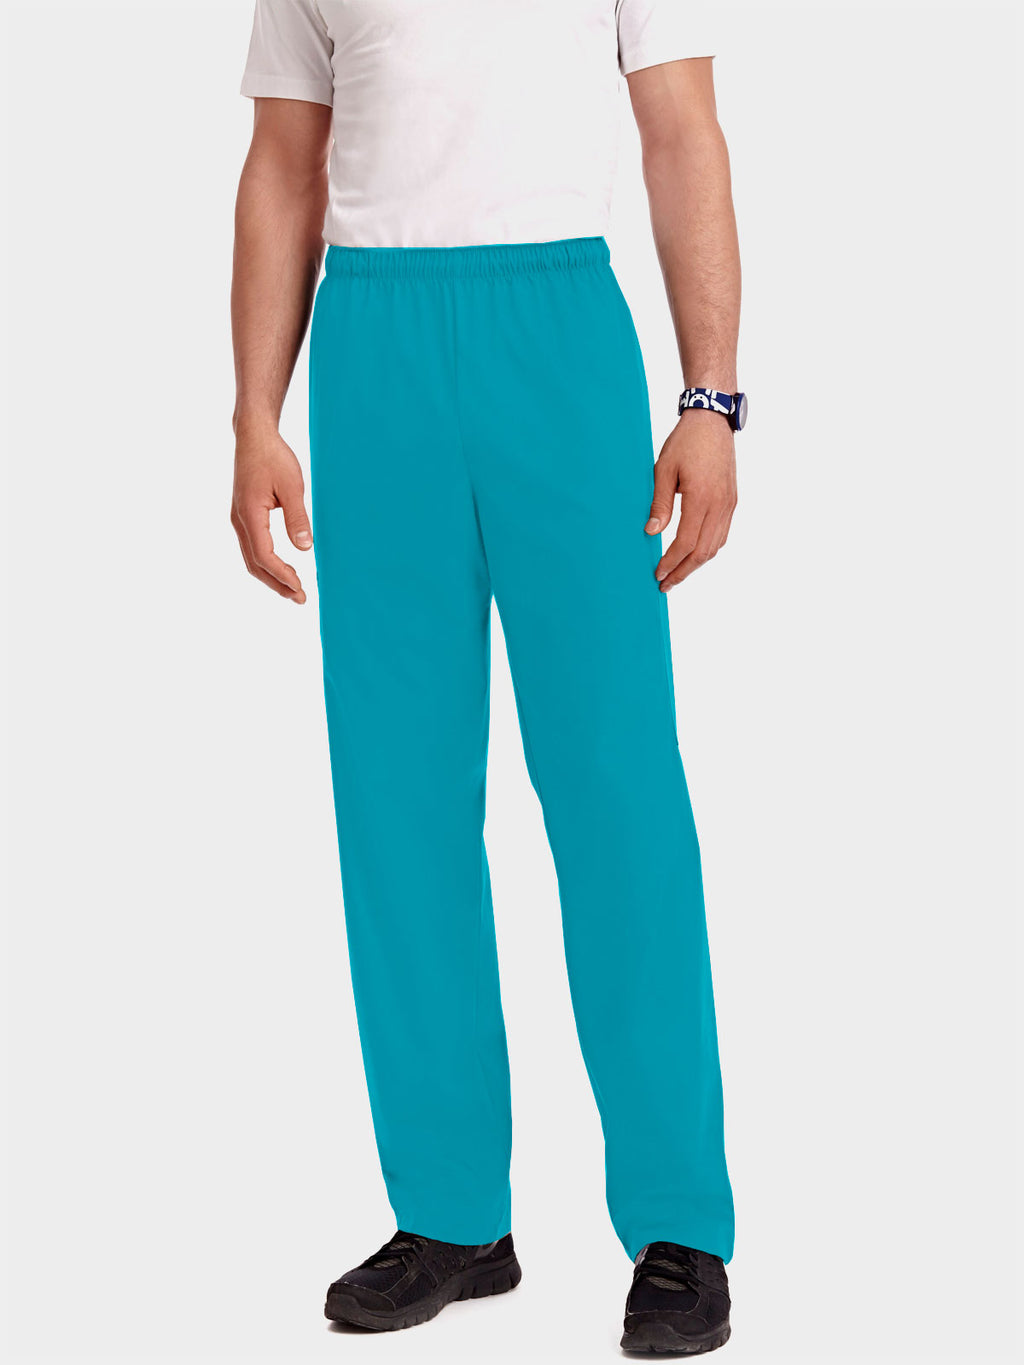 727 Excel 6 Pocket Unisex Pant - Incredibly Comfortable Uniforms